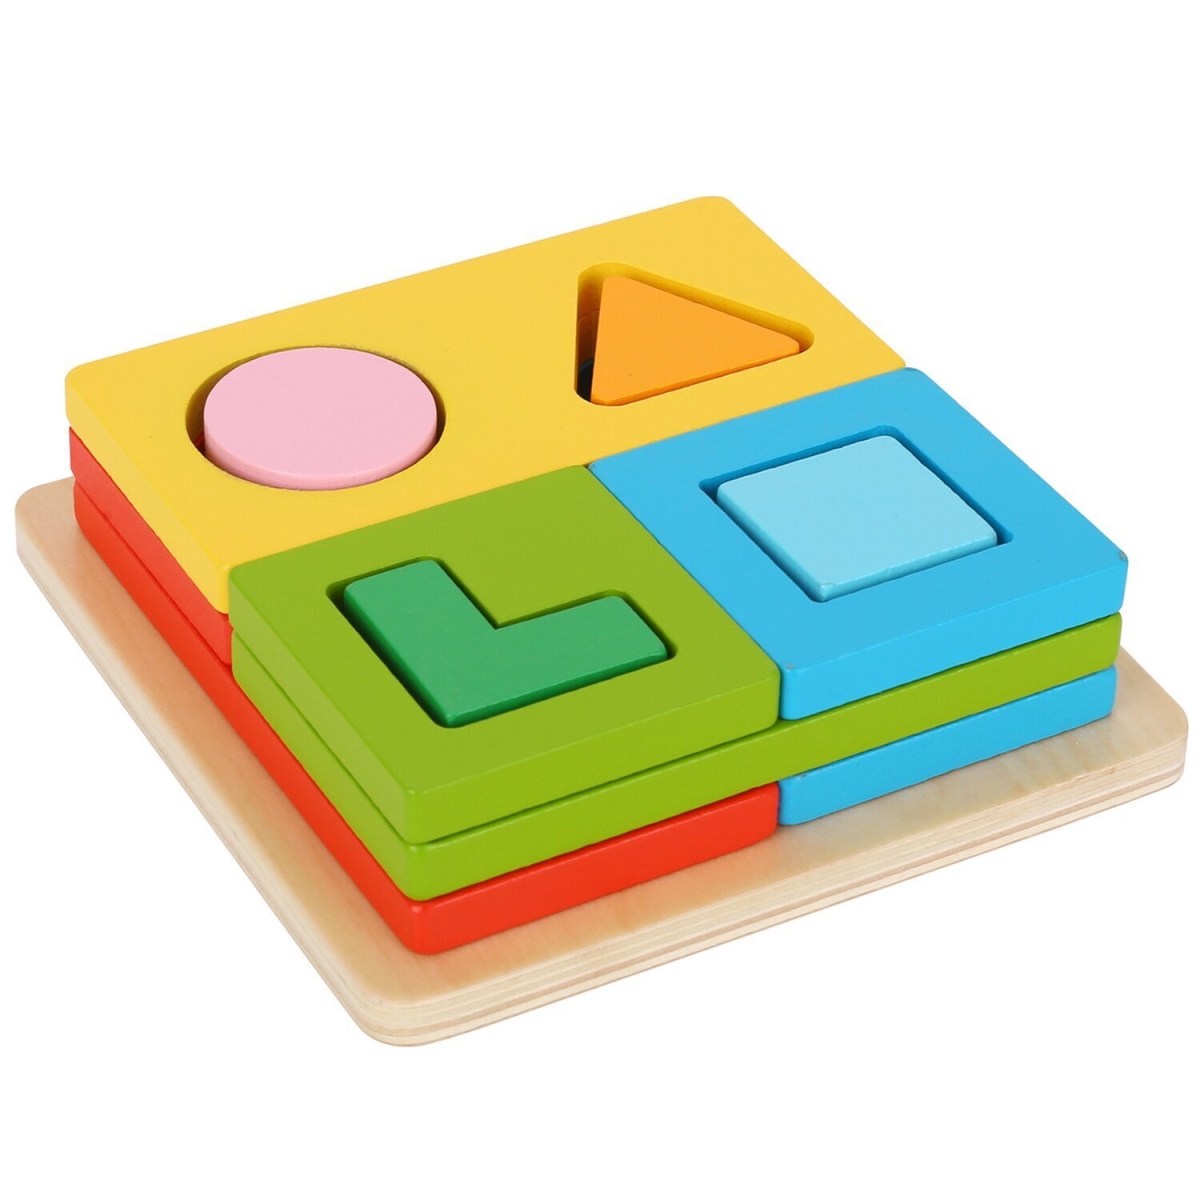 Picture of Tooky Toy 300294 14 x 14 x 5 cm Multi-Shape Sorter